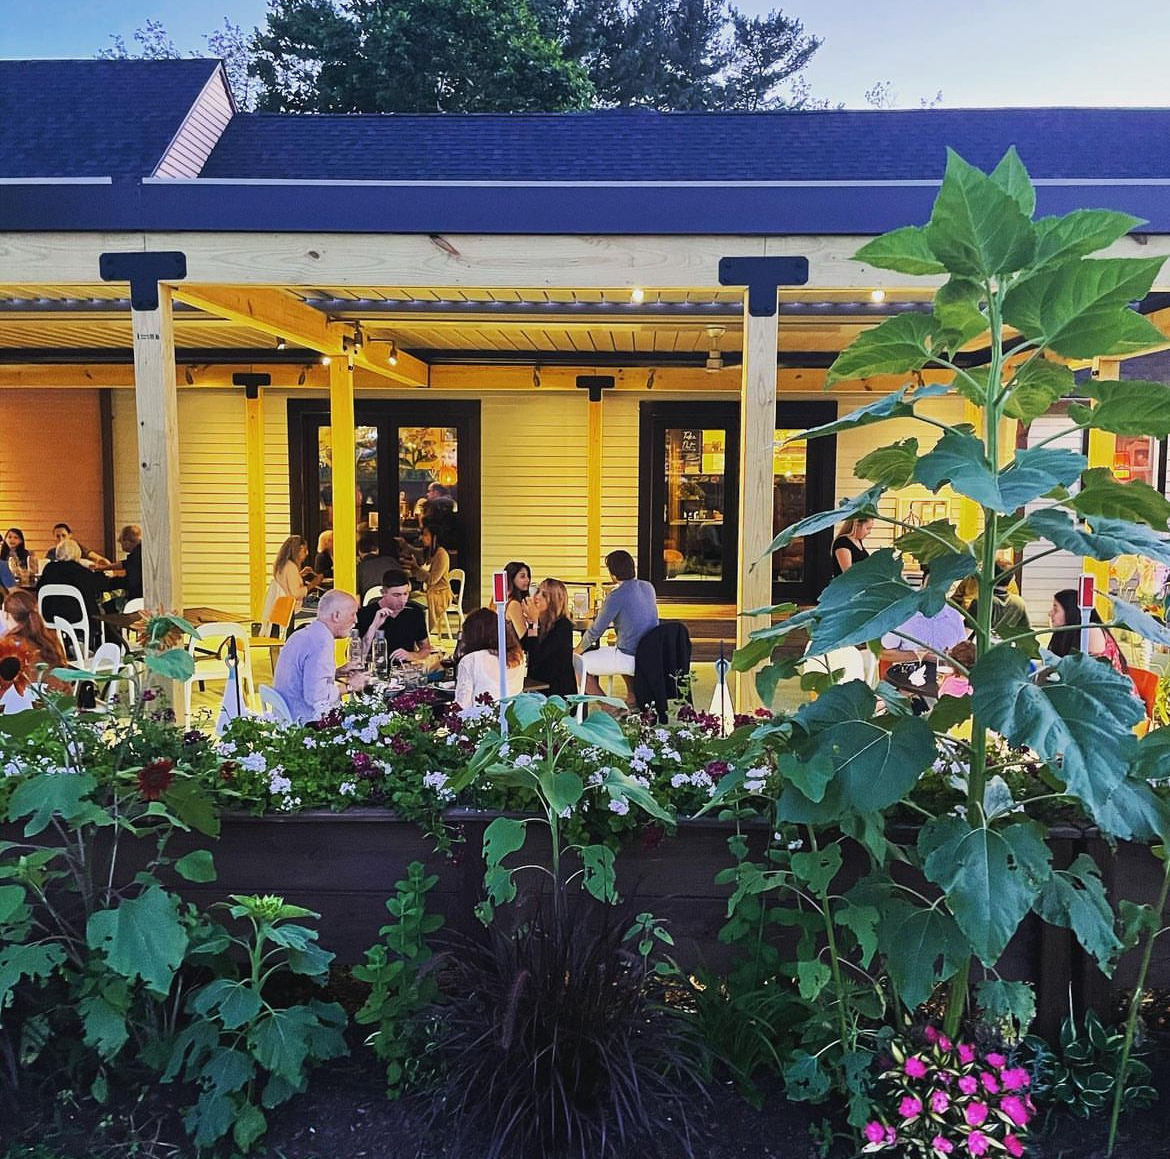 Good News Café, originally opened in 1994, has been a community favorite in Woodbury for 3 decades. The pergola was added during the Covid-19 pandemic so customers could still enjoy the taste of Good News while safety precautions were in place.